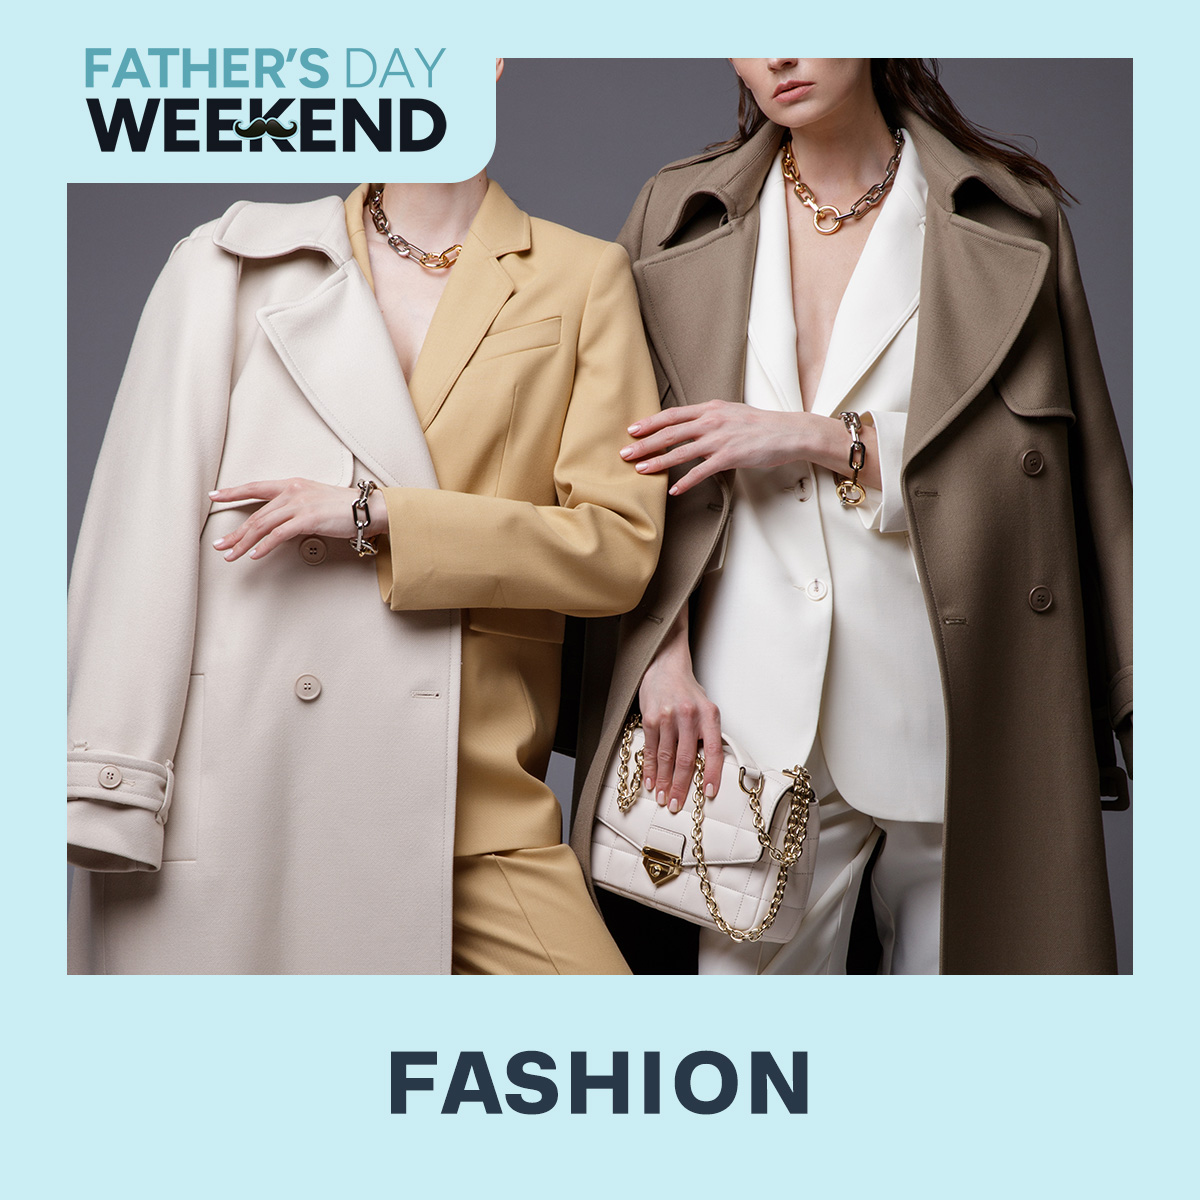 Father's Day Fashion Weekend